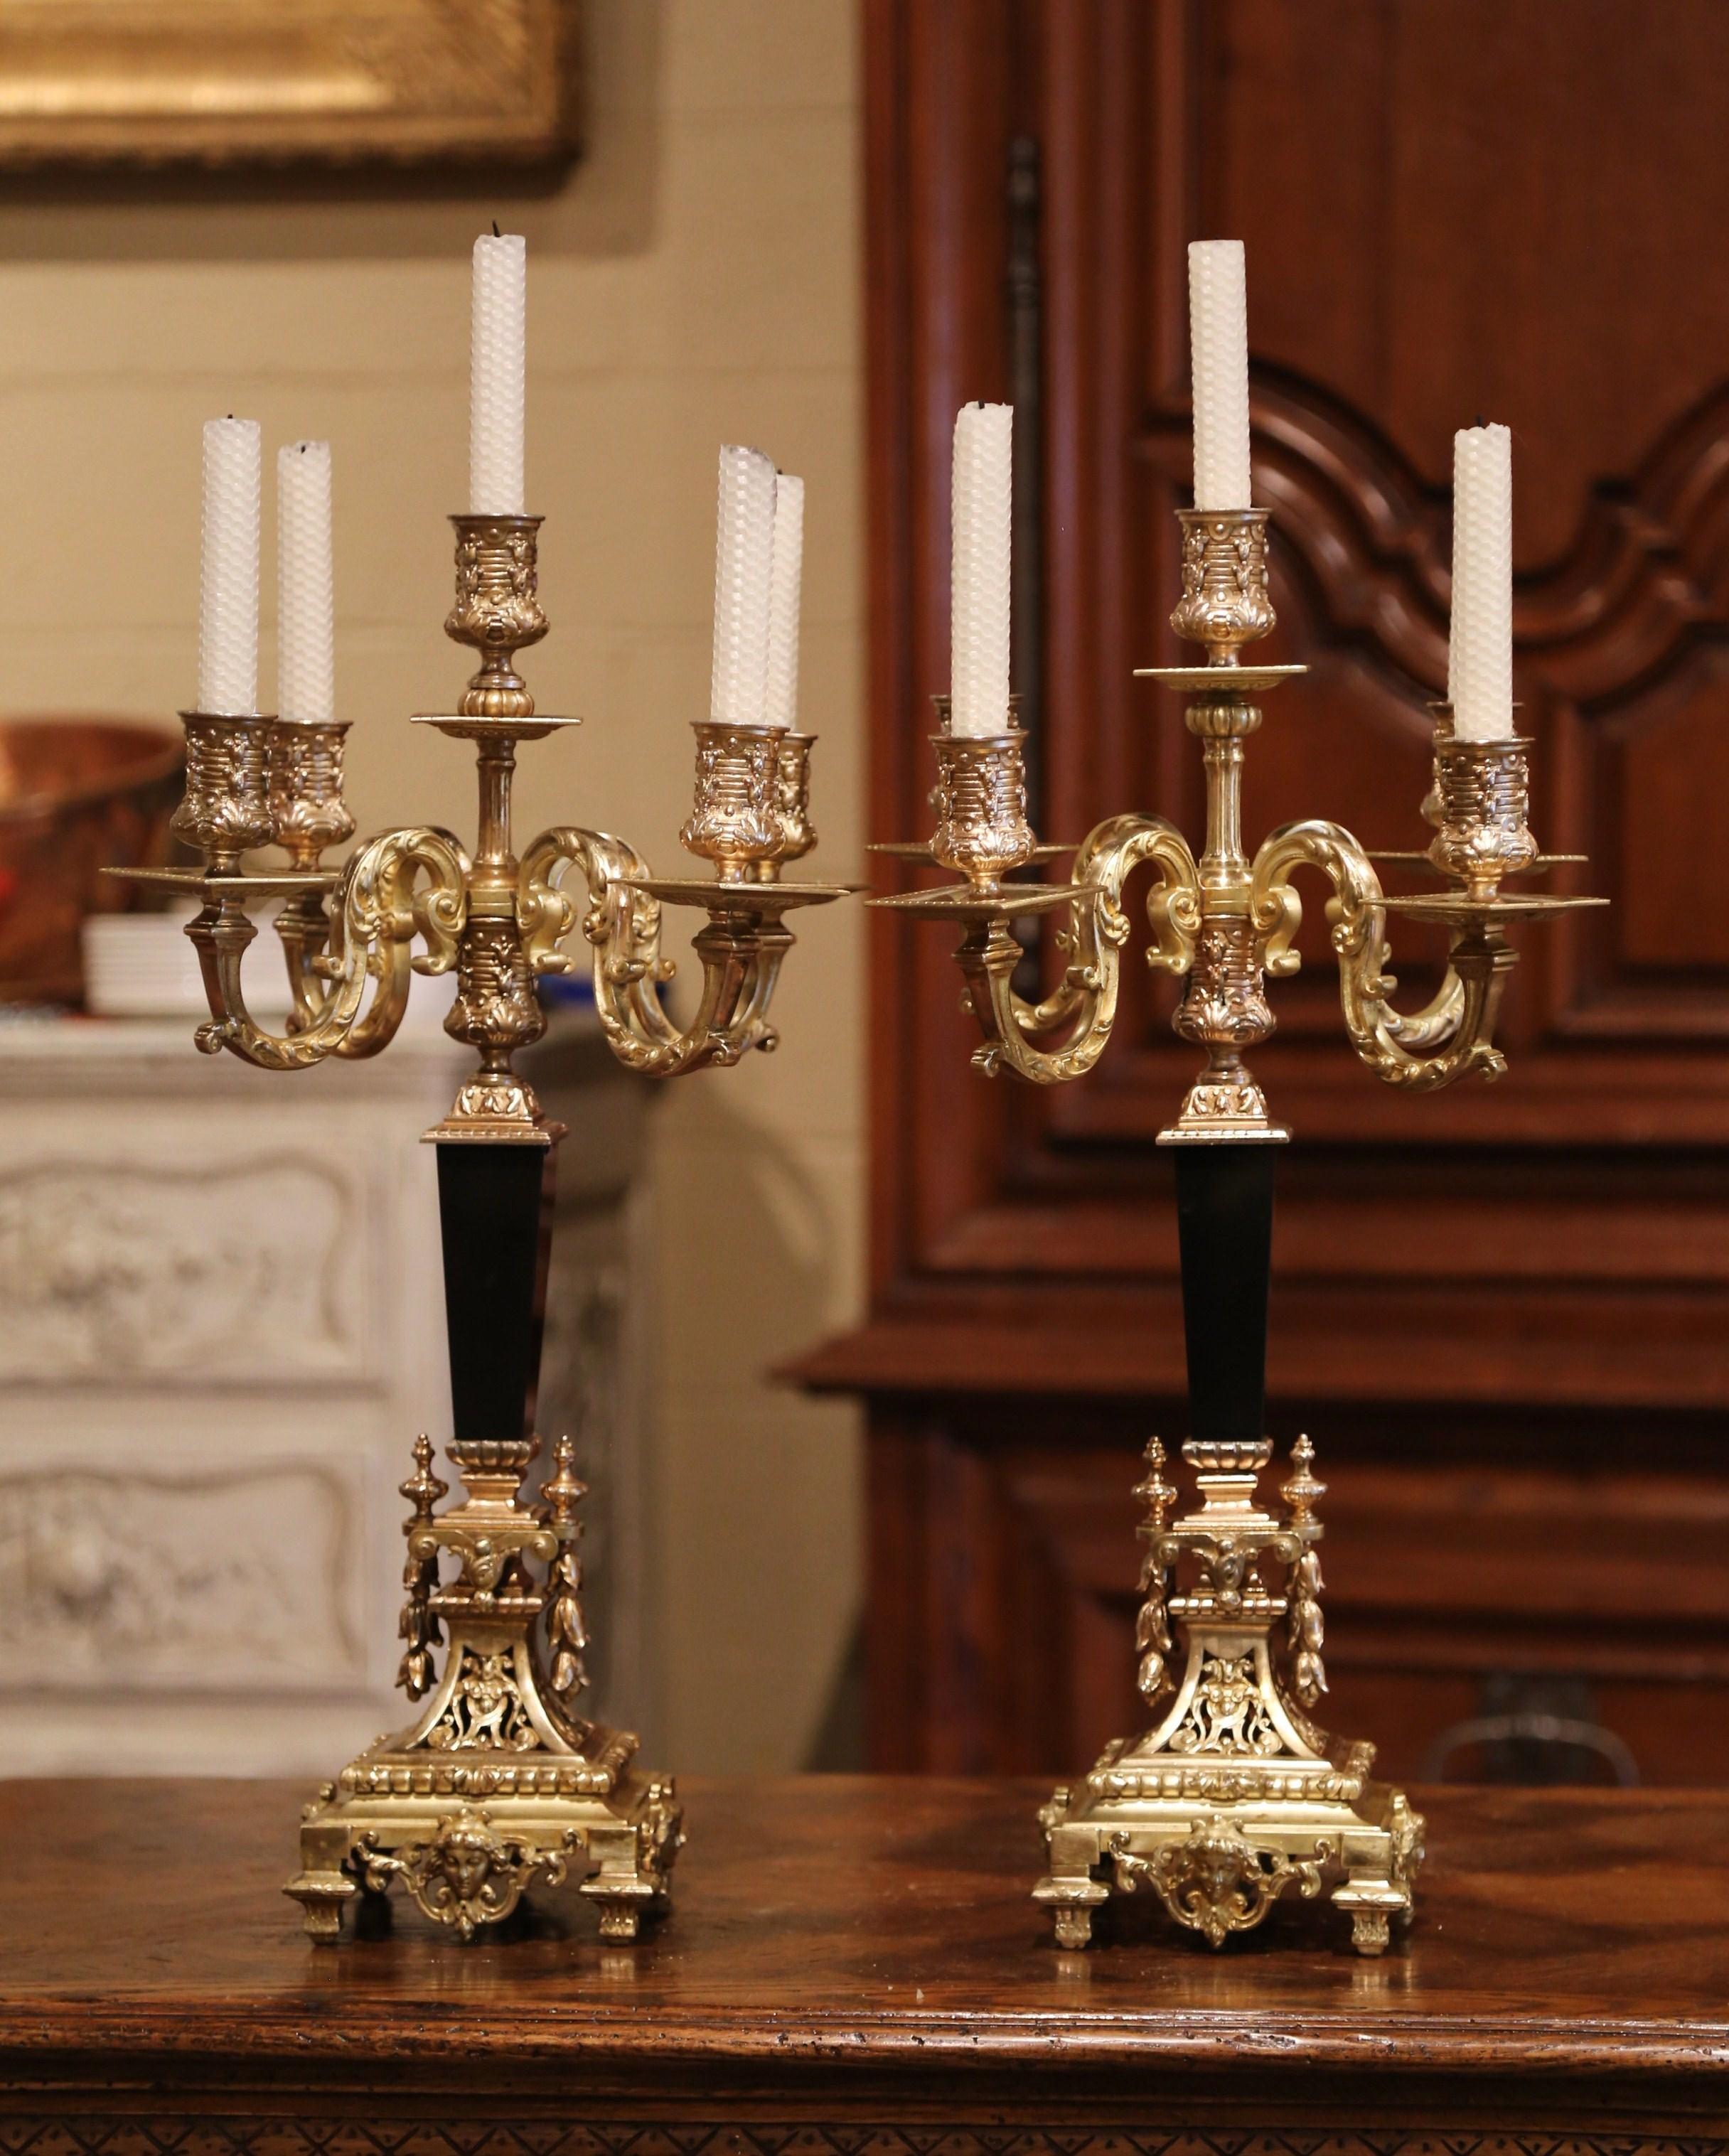 Napoleon III Pair of 19th Century French Bronze Dore and Black Marble Five-Arm Candelabras